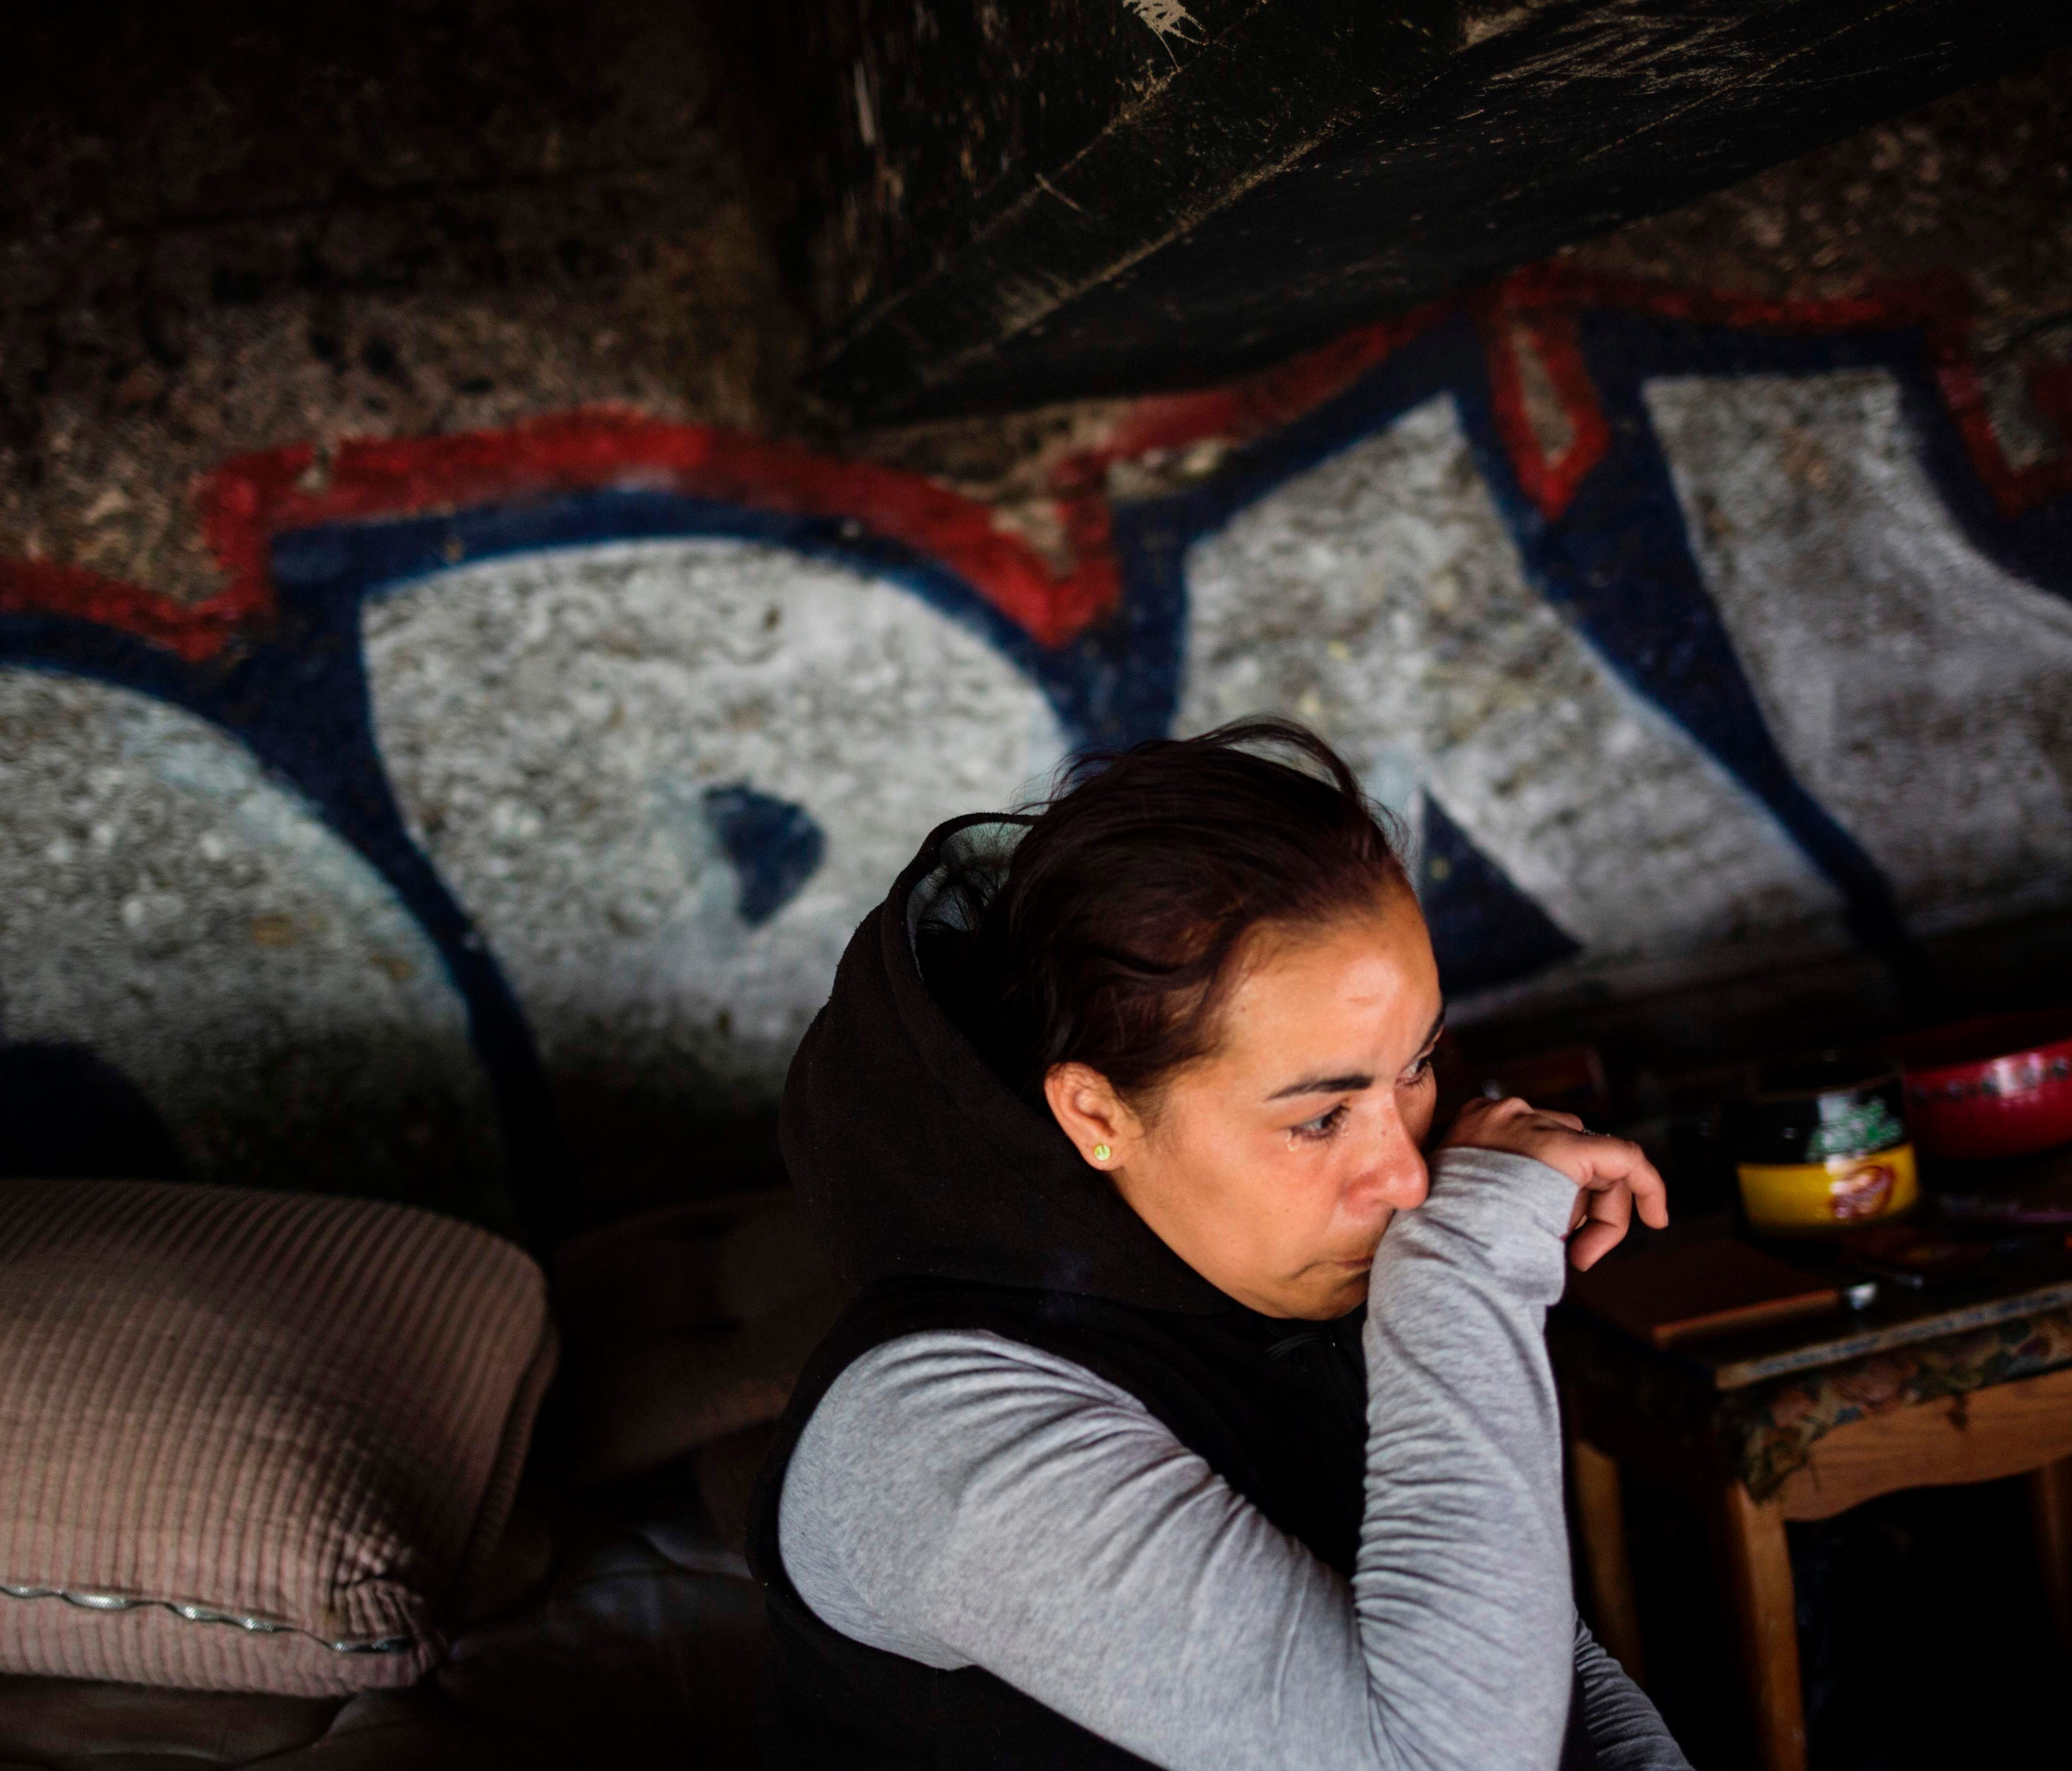 Jessica, a homeless heroin addict, wipes away tears as she describes how she tested positive for HIV after being raped last year in this spot under the bridge where she lives  in the Kensington neighborhood of Philadelphia, Pennsylvania, on April 14,